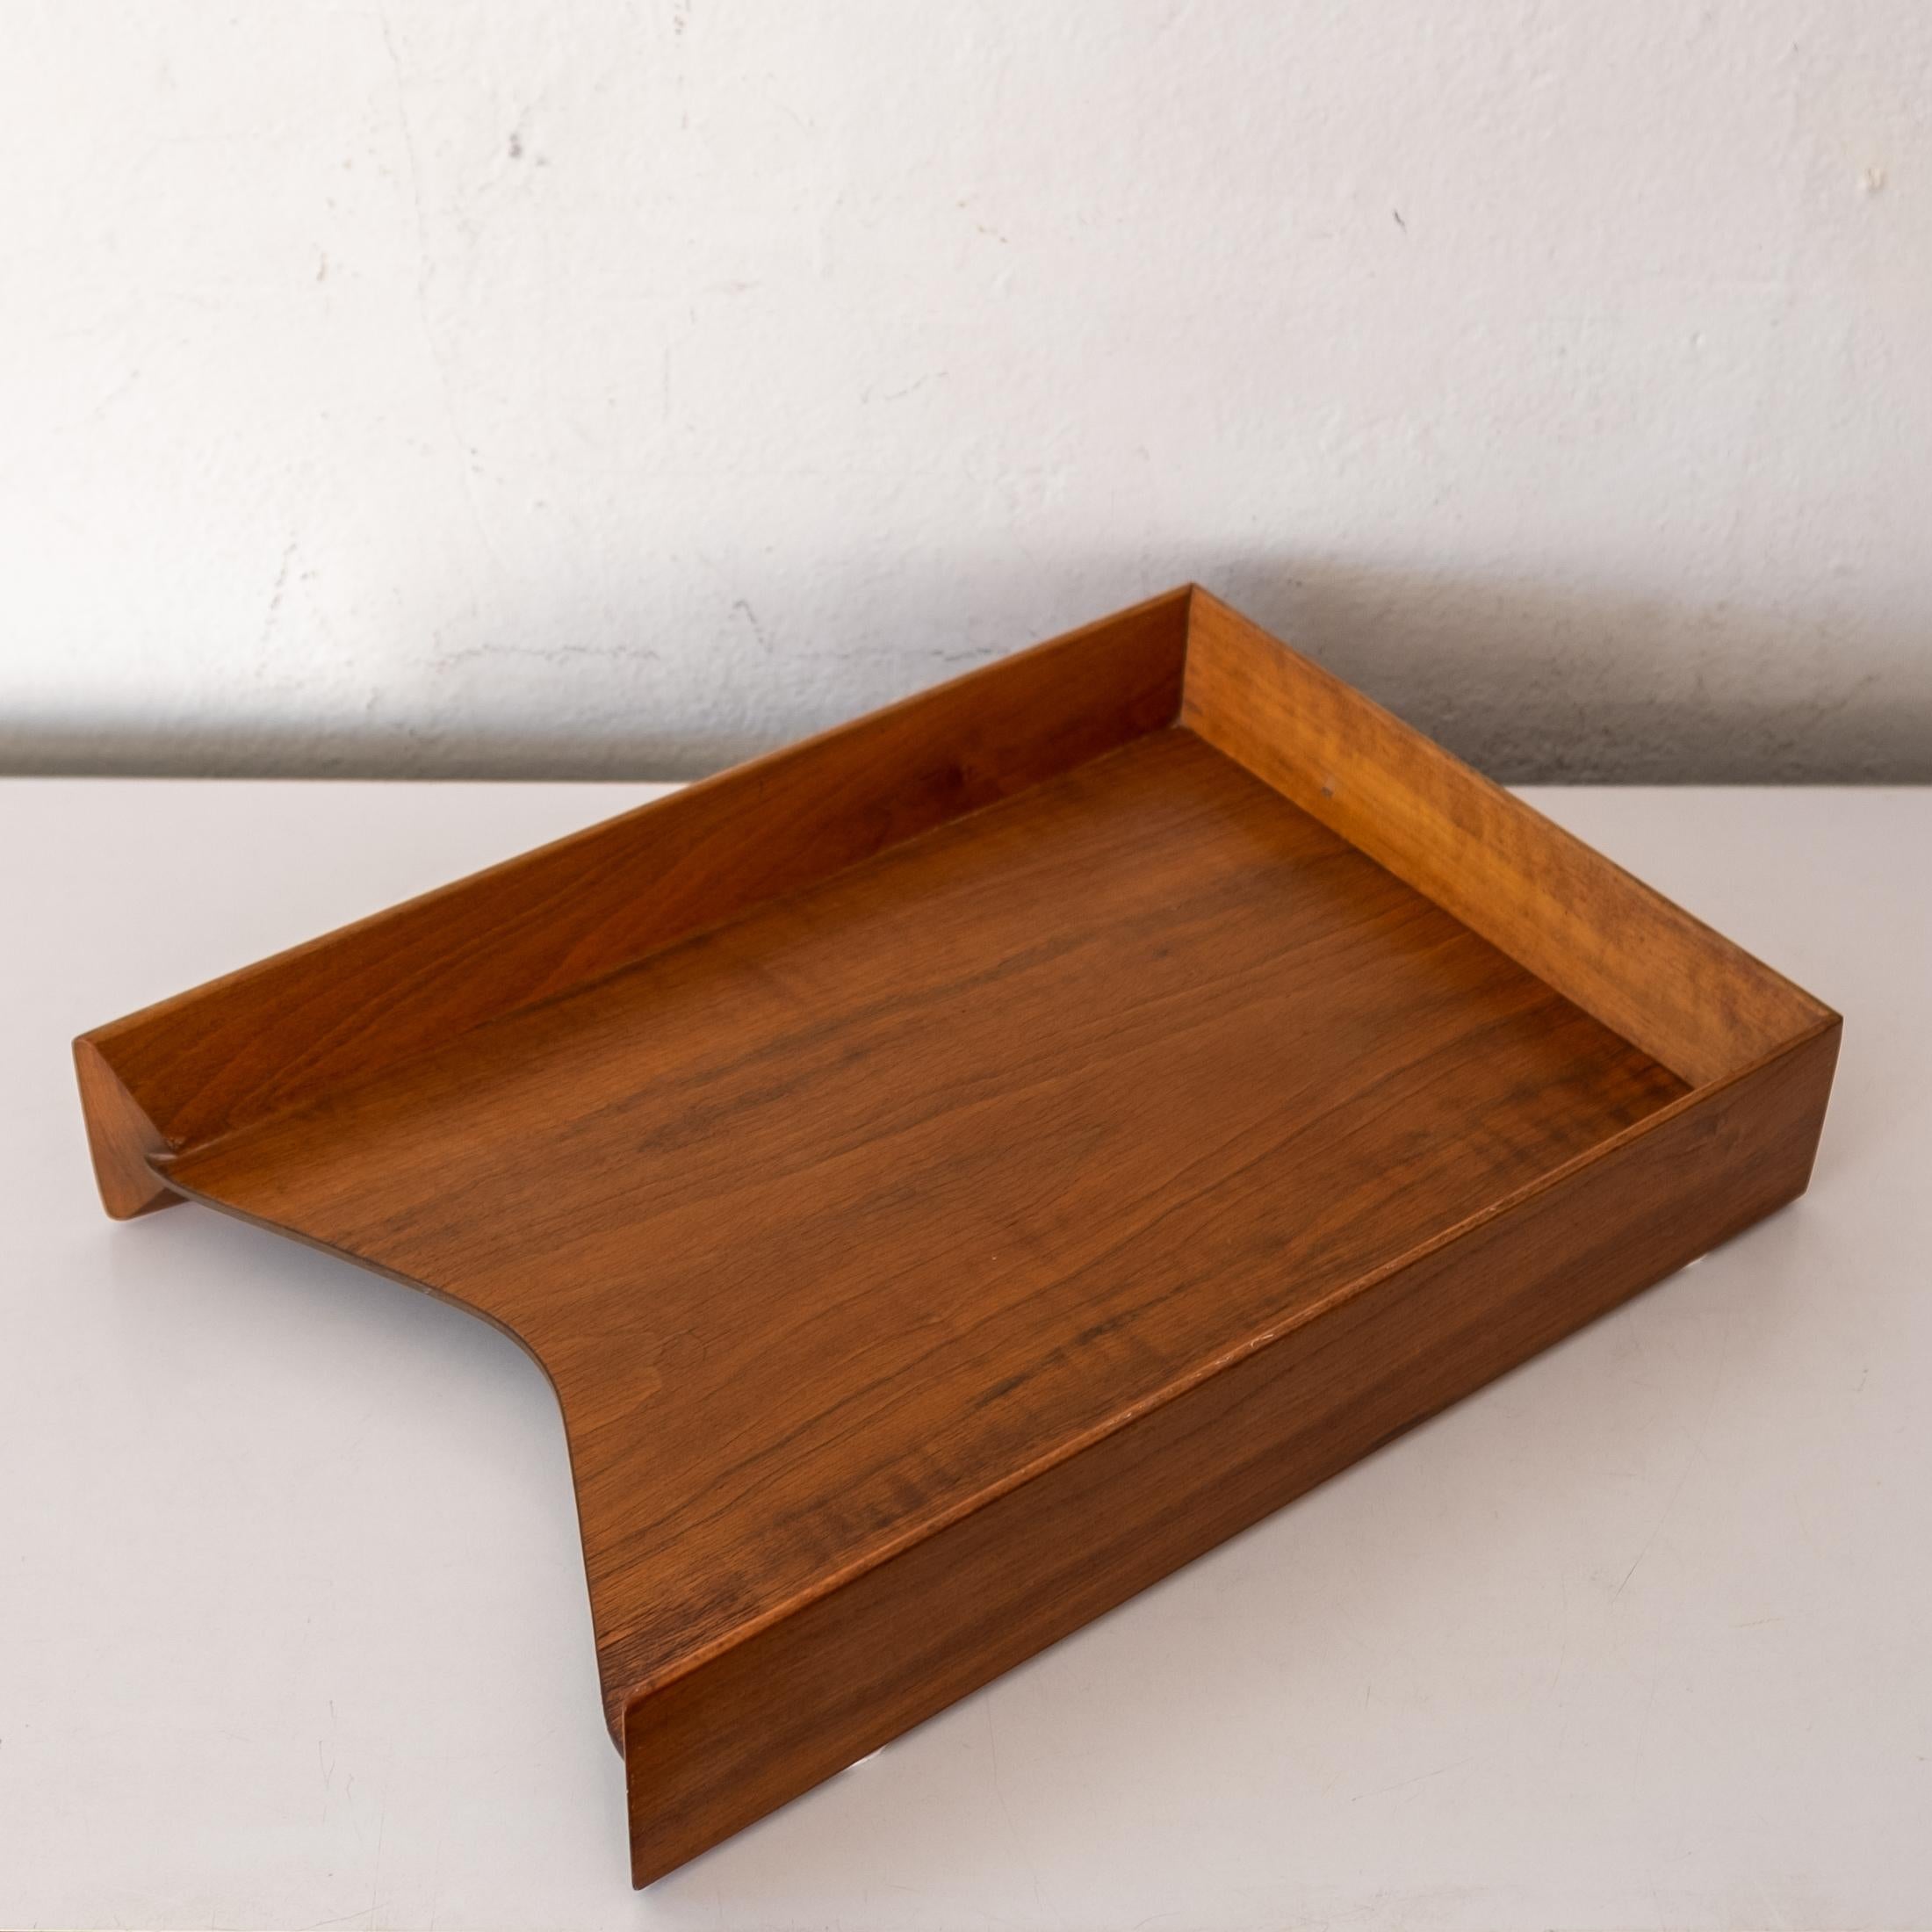 Incredible mid-century letter tray in walnut. Great lines and construction. Has a University of Nebraska inventory tag. Two available.